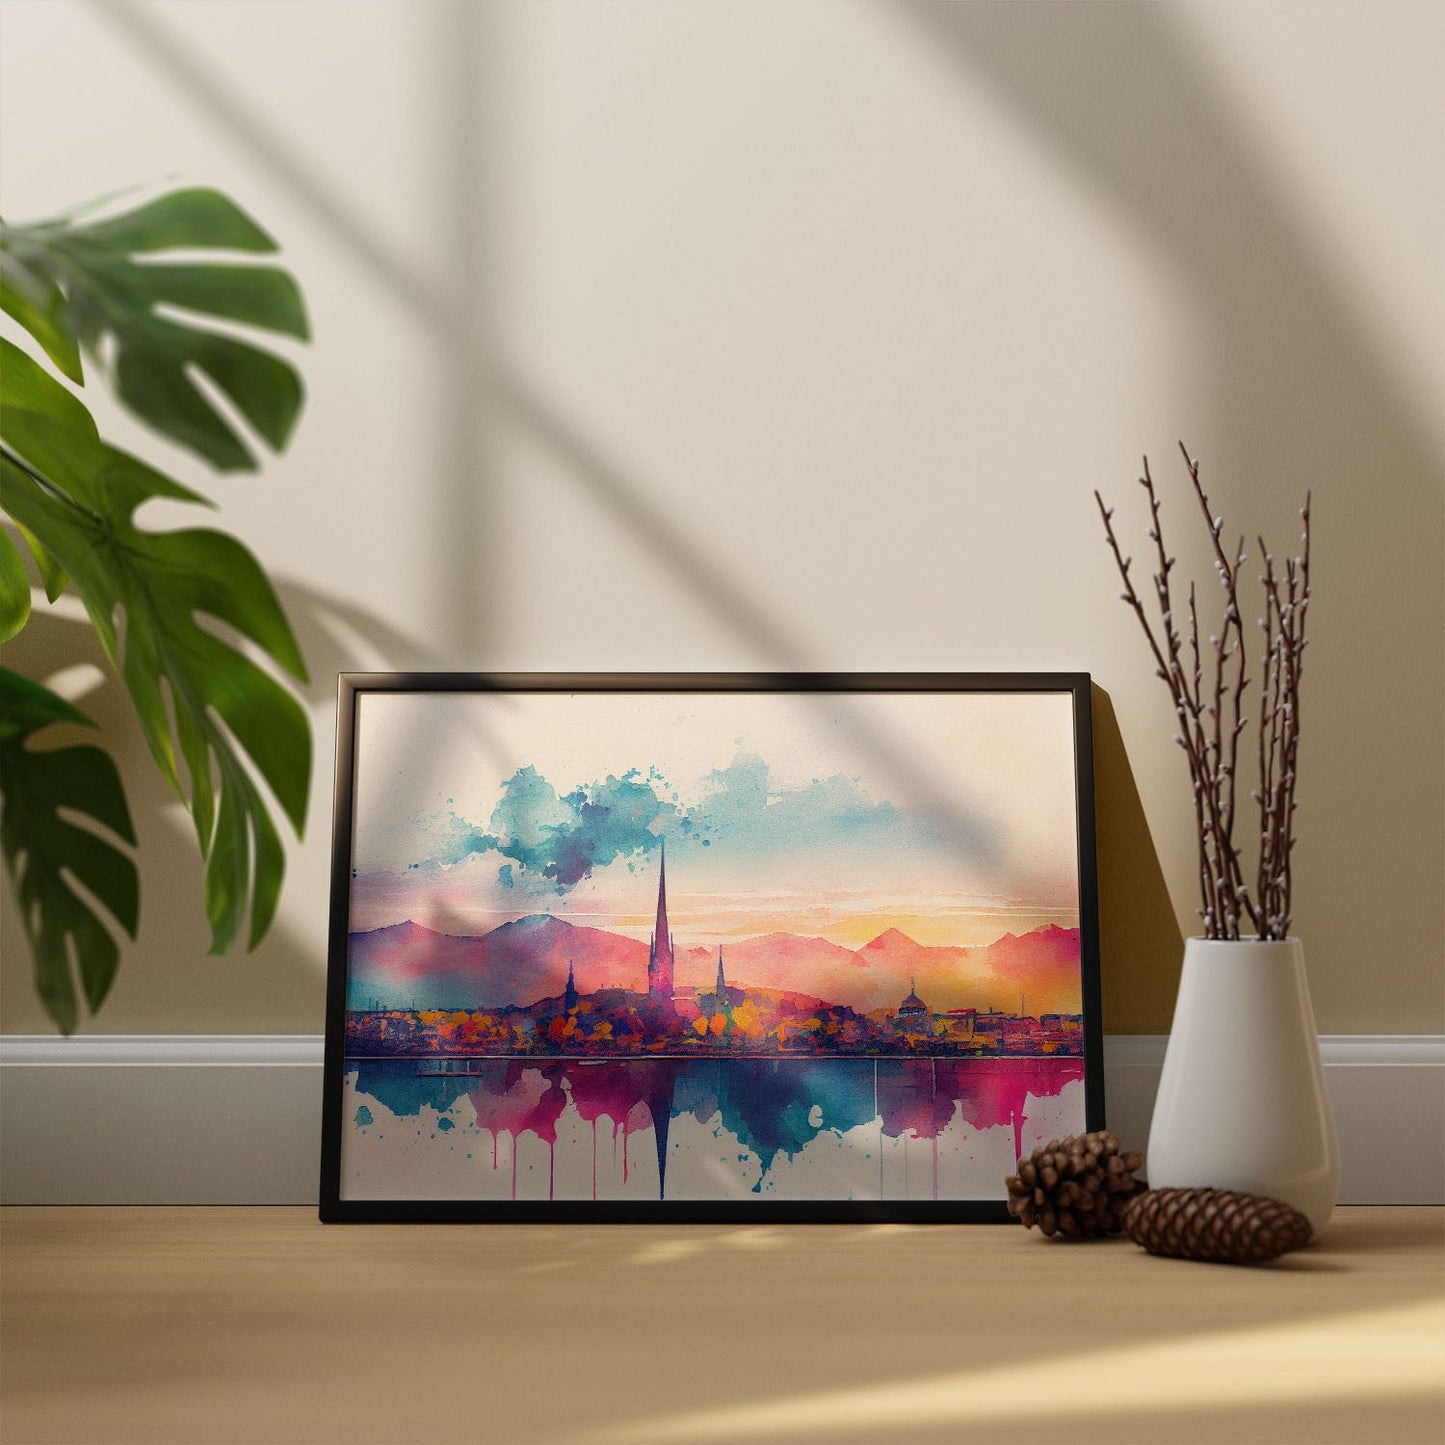 Nacnic watercolor of a skyline of the city of Geneva_1. Aesthetic Wall Art Prints for Bedroom or Living Room Design.-Artwork-Nacnic-A4-Sin Marco-Nacnic Estudio SL